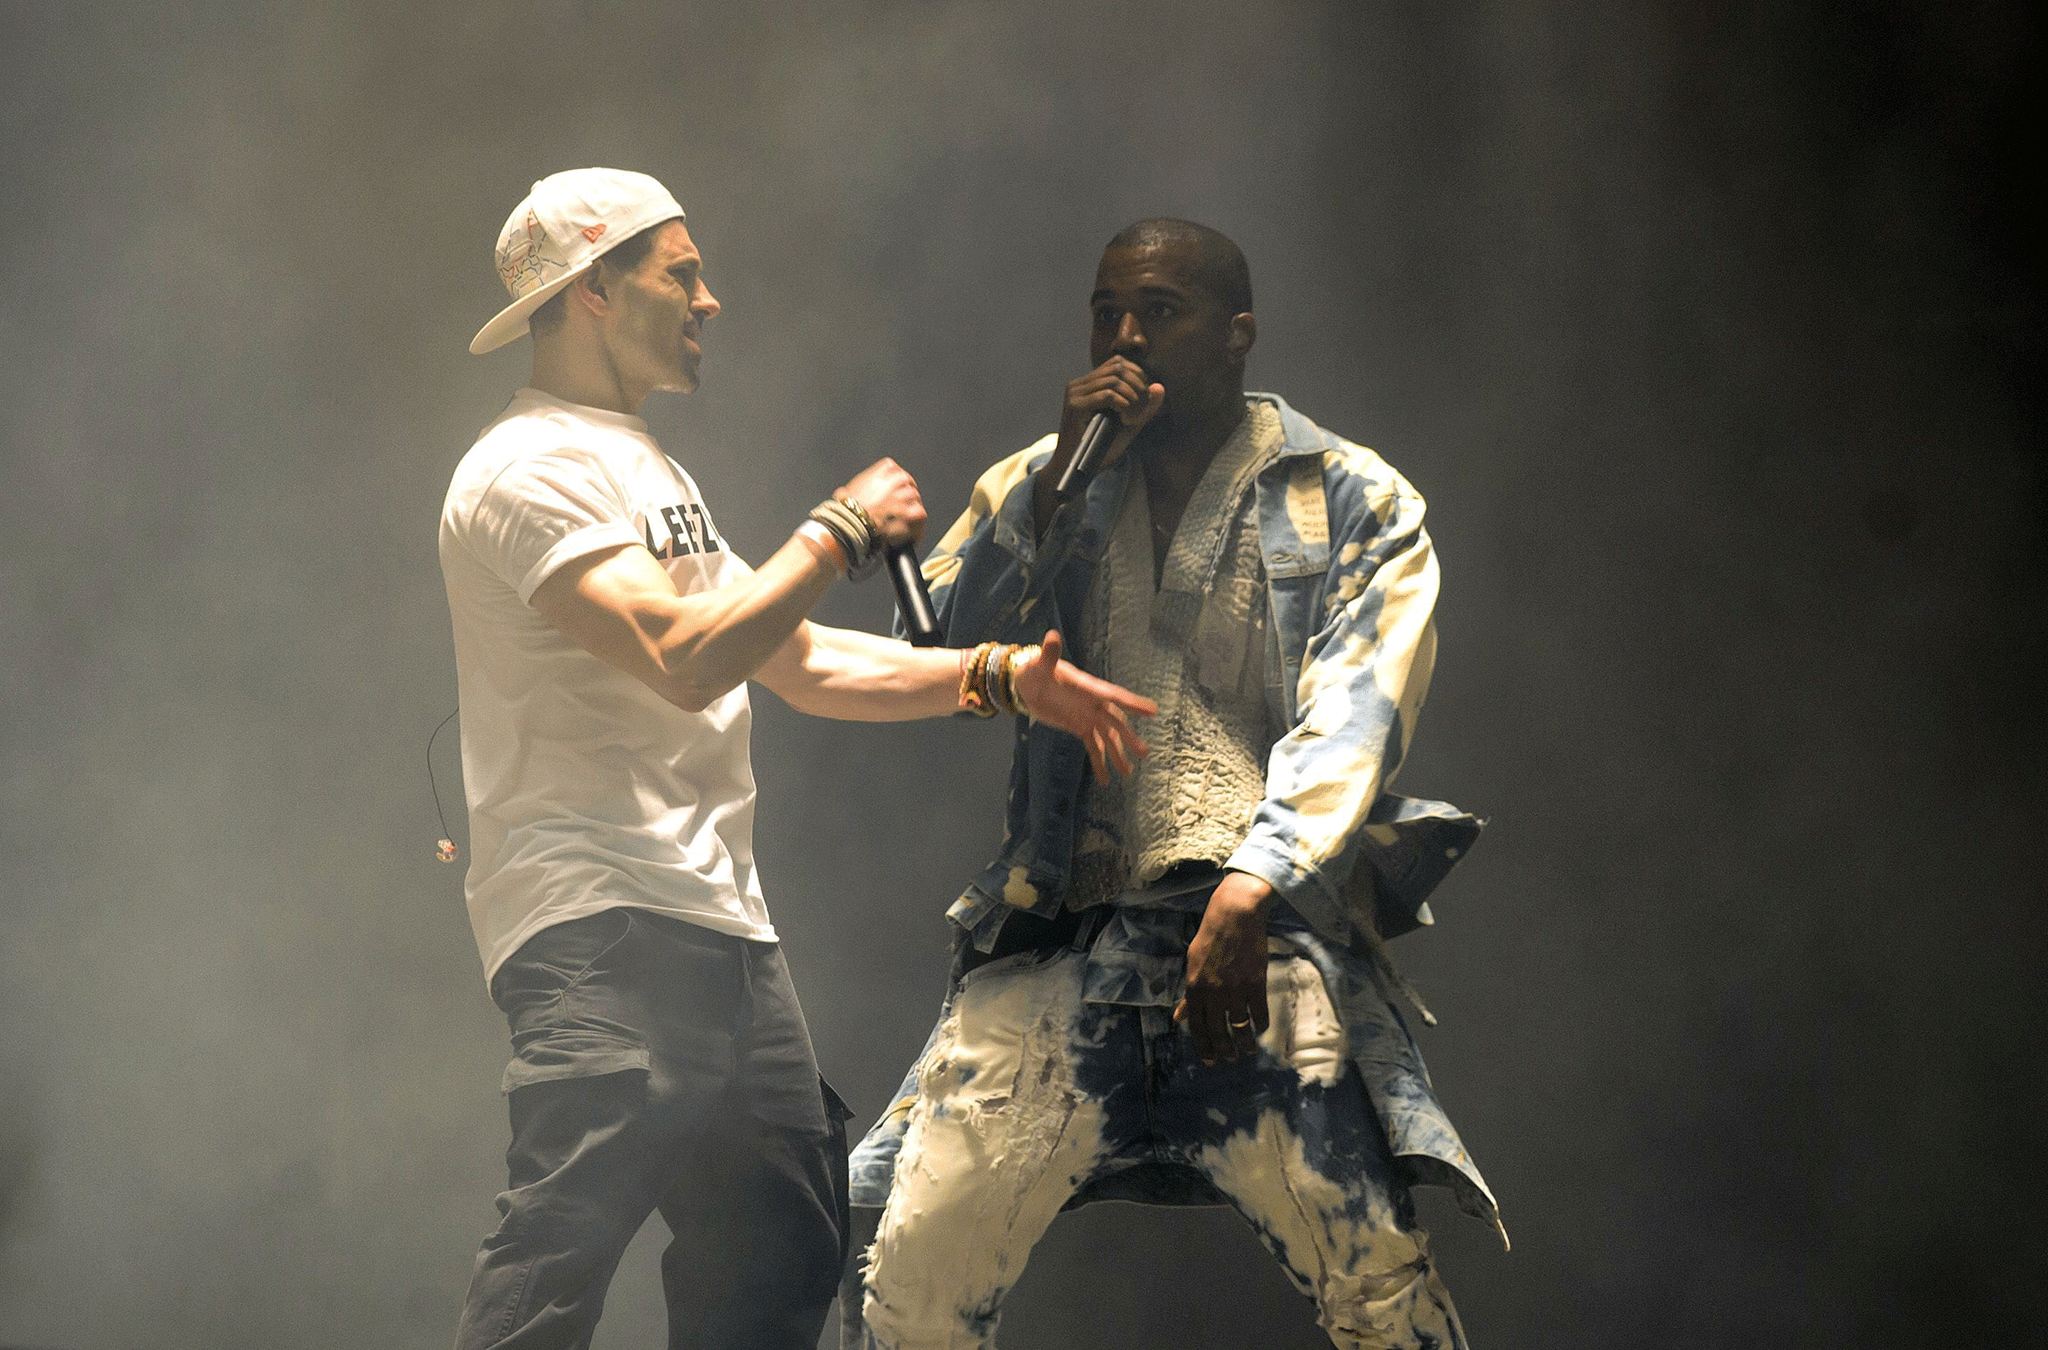 Lee Nelson invades the stage as Kanye West performs